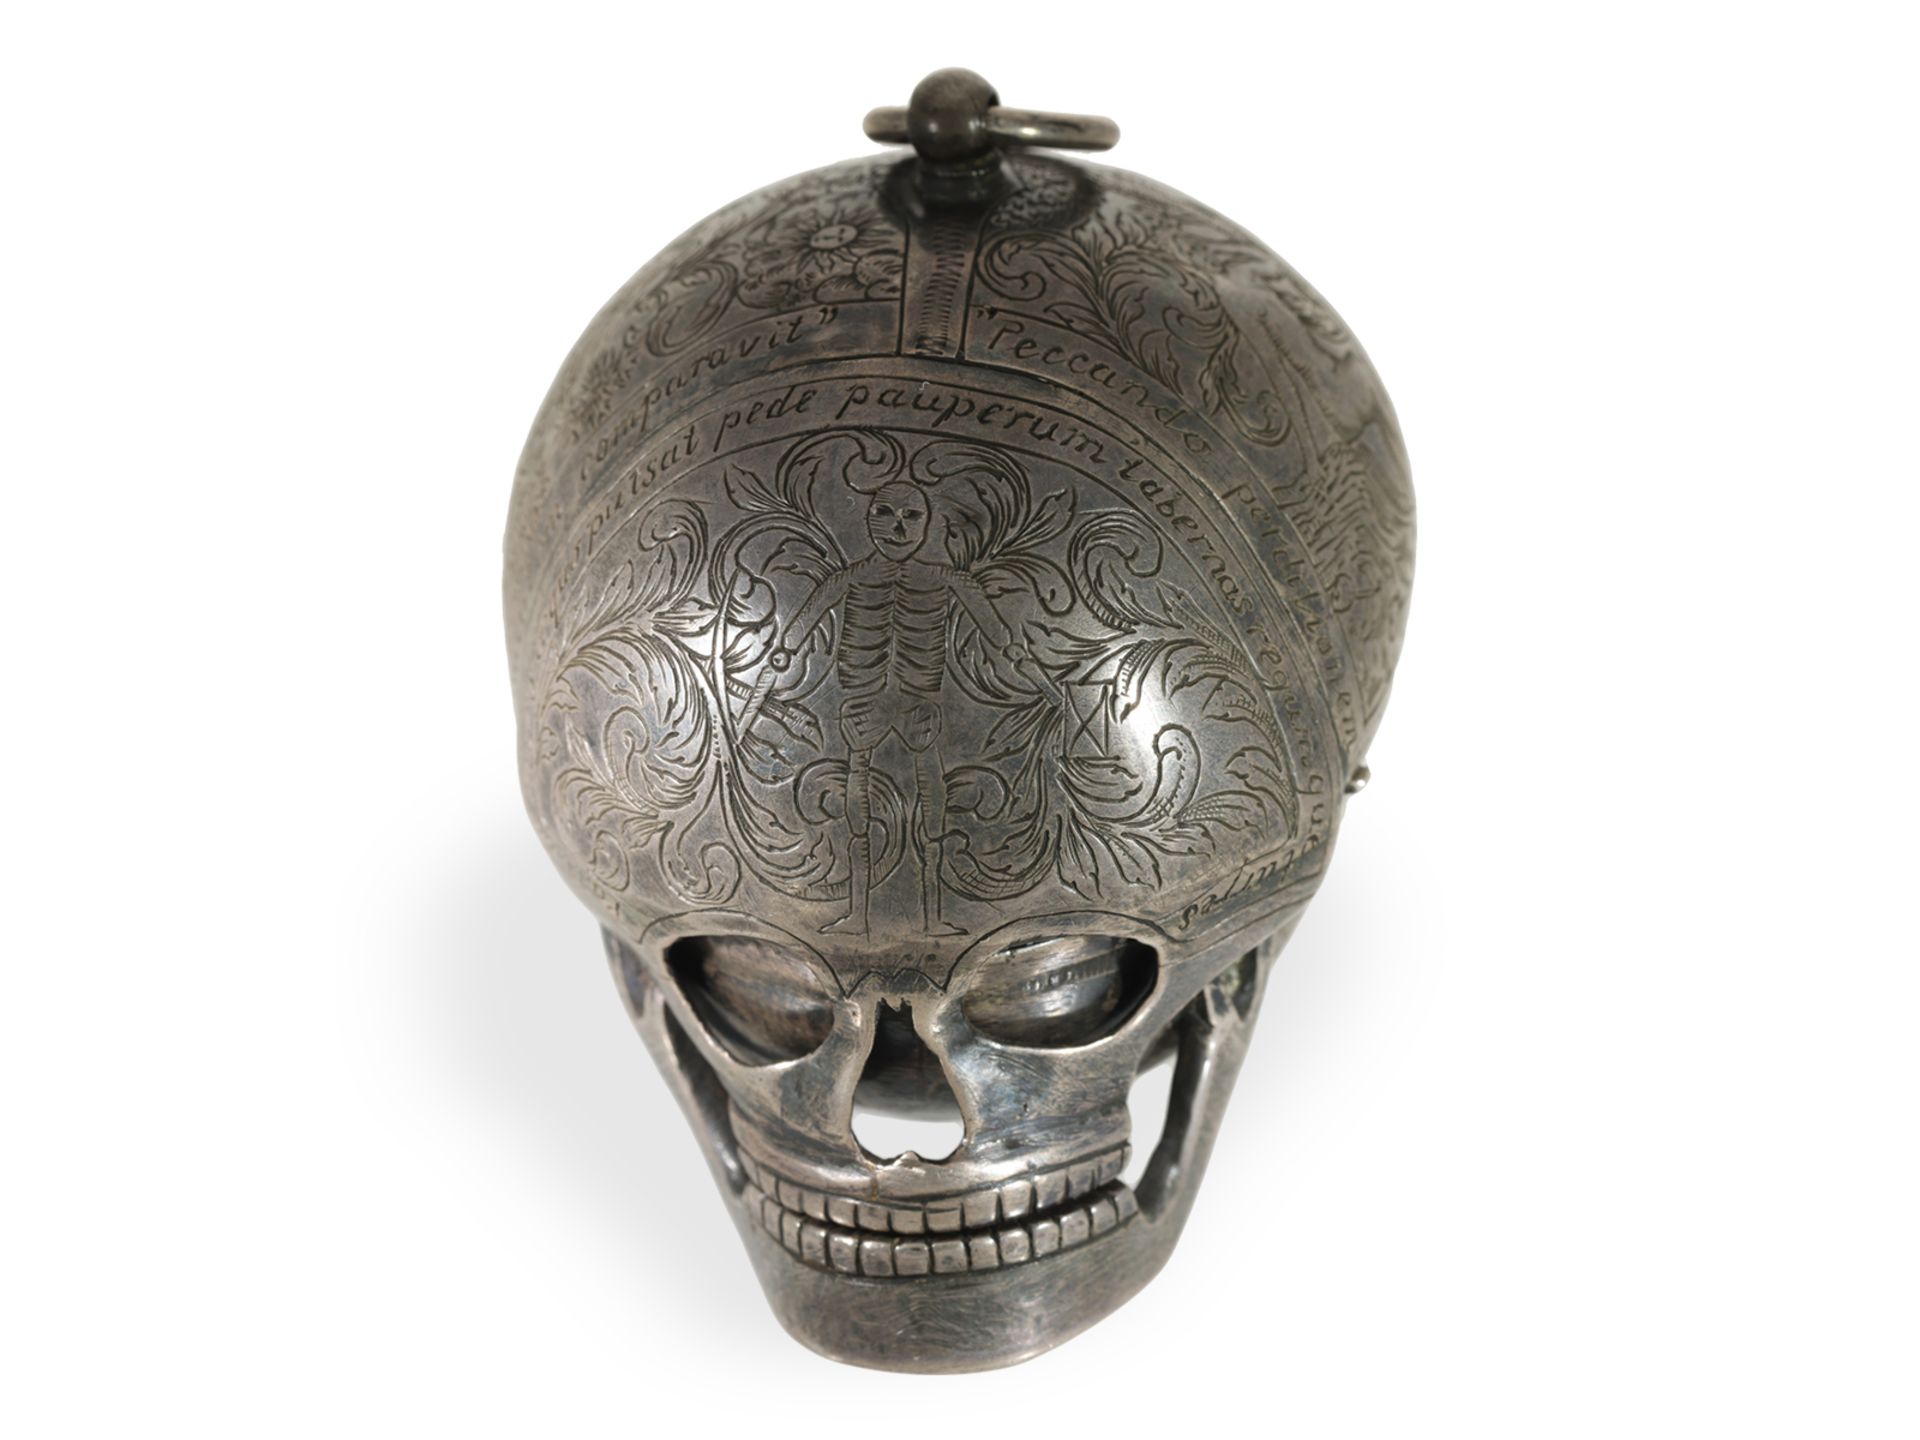 Pendant watch: extremely rare, early Renaissance-style pendant watch in the shape of a skull, signed - Image 7 of 9